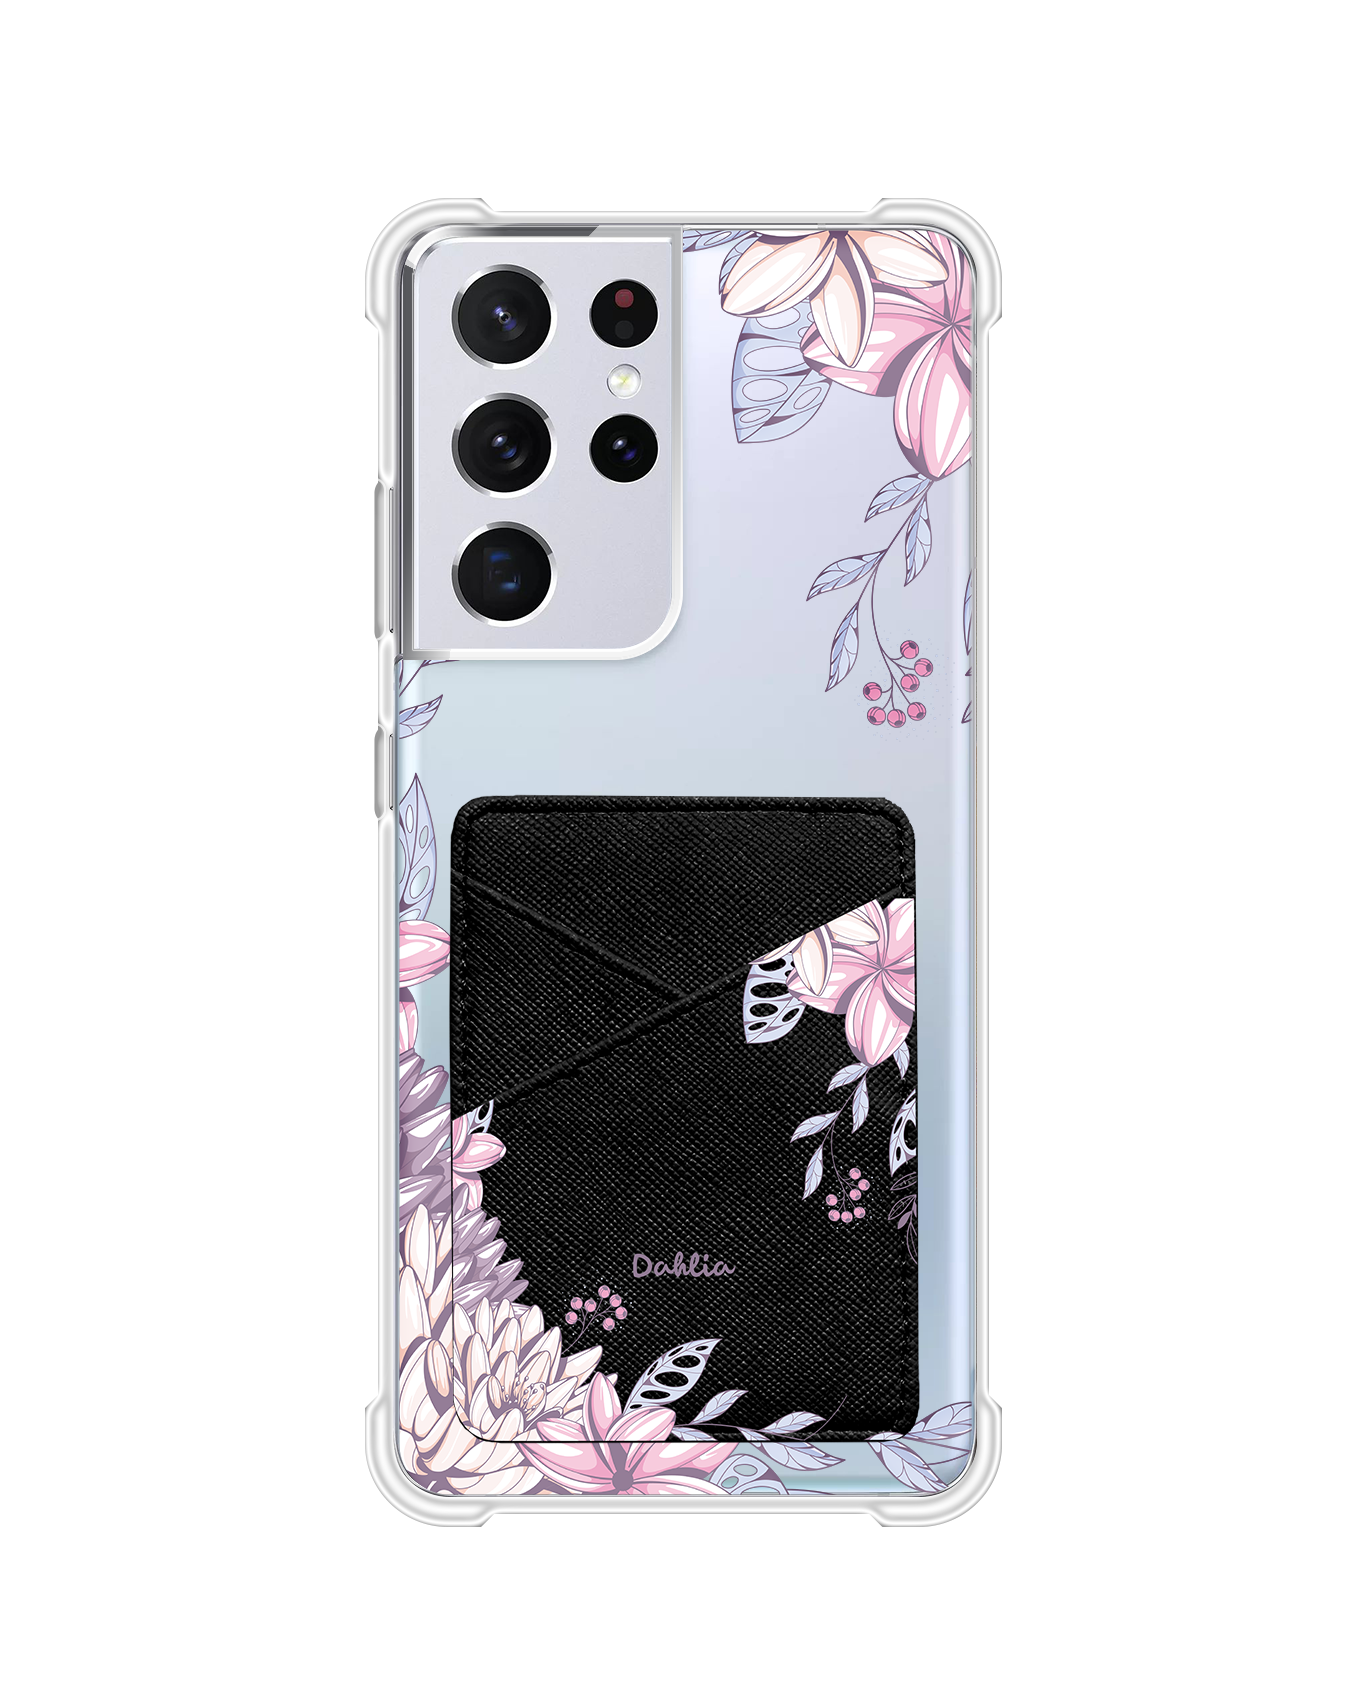 Android Phone Wallet Case - Dahlia